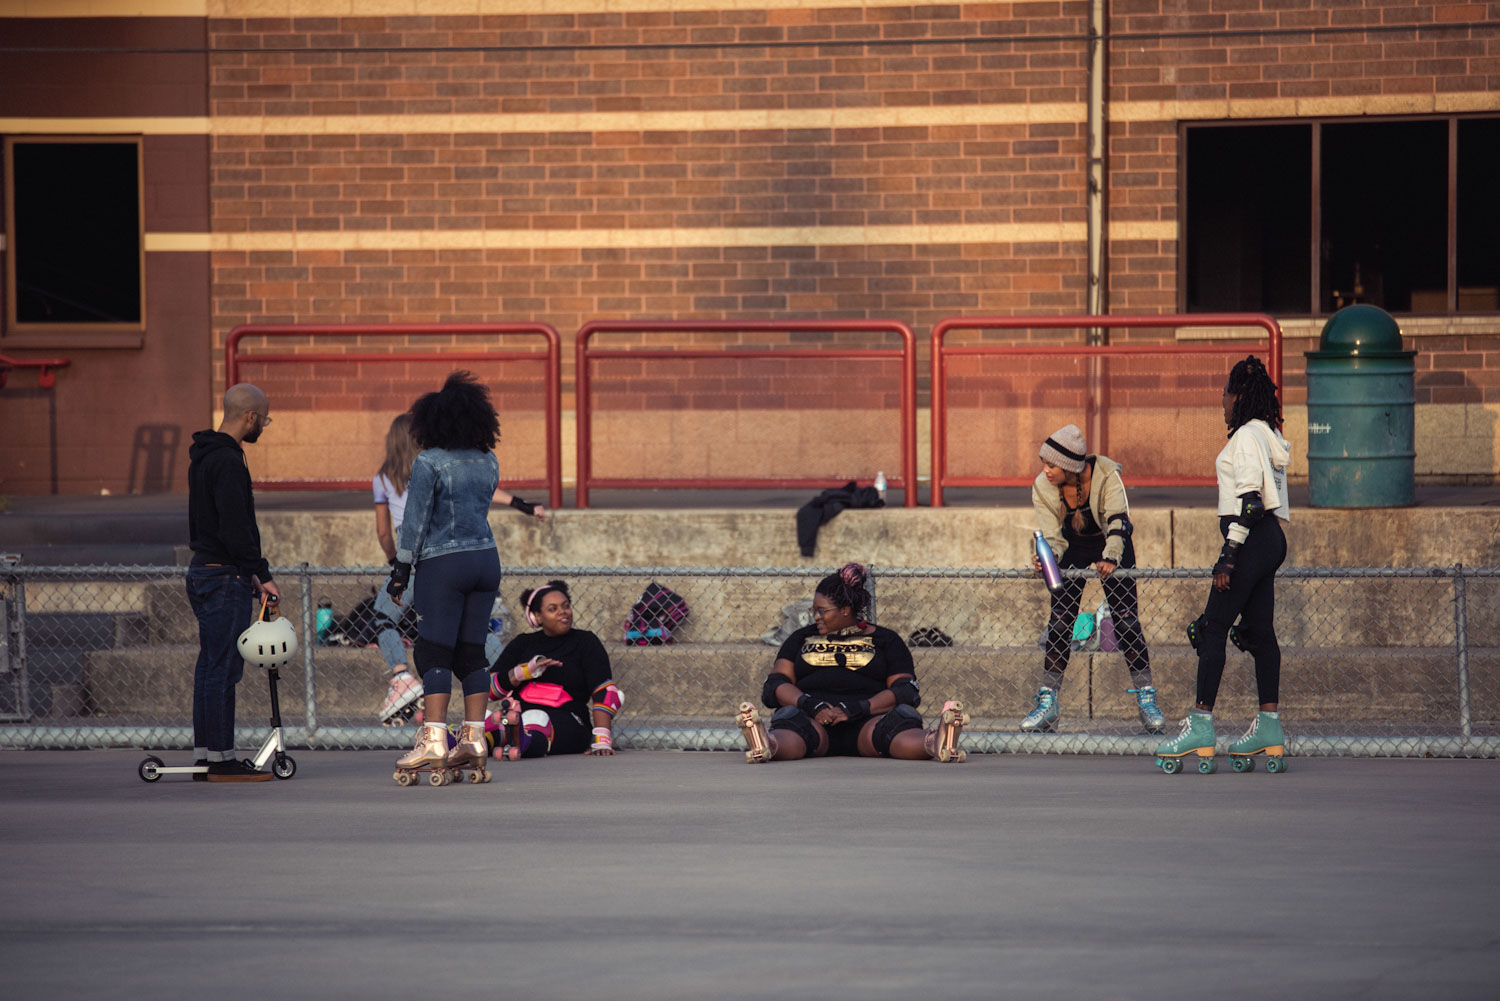 Group of roller-skaters relaxing on a playground 